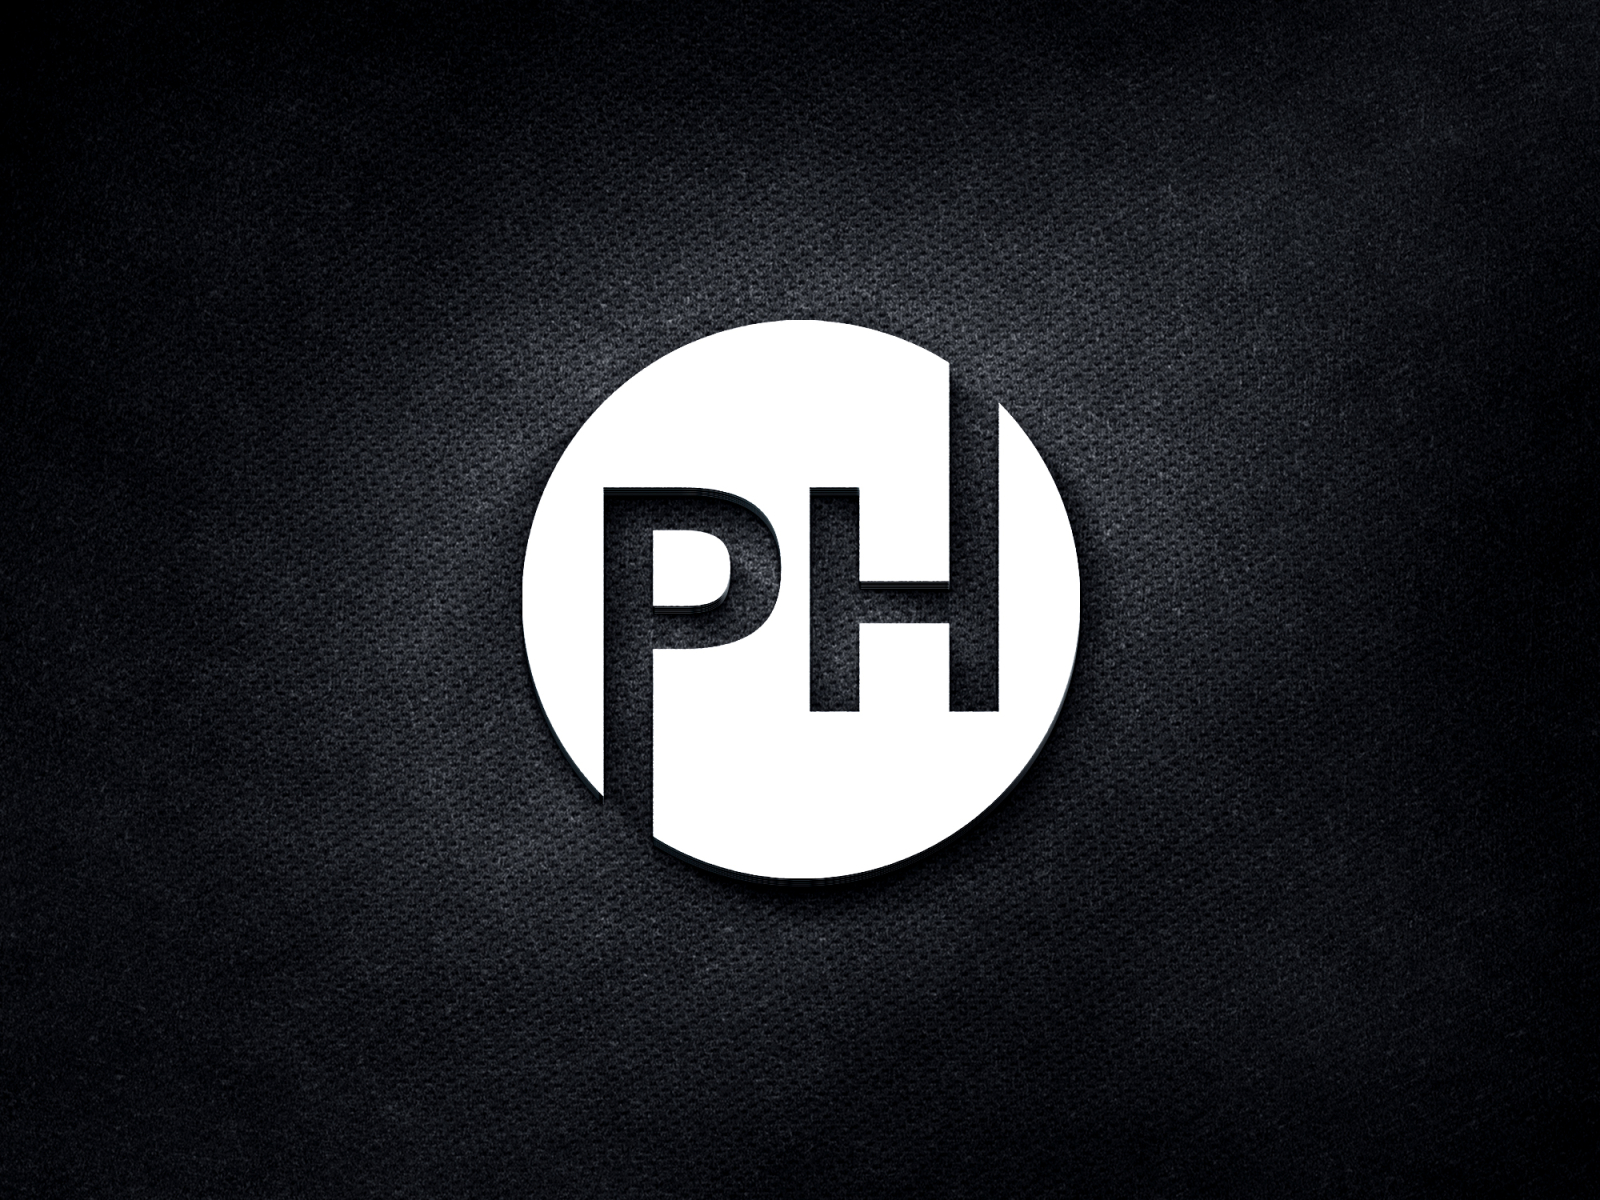 4,812 Ph Logo Images, Stock Photos, 3D objects, & Vectors | Shutterstock